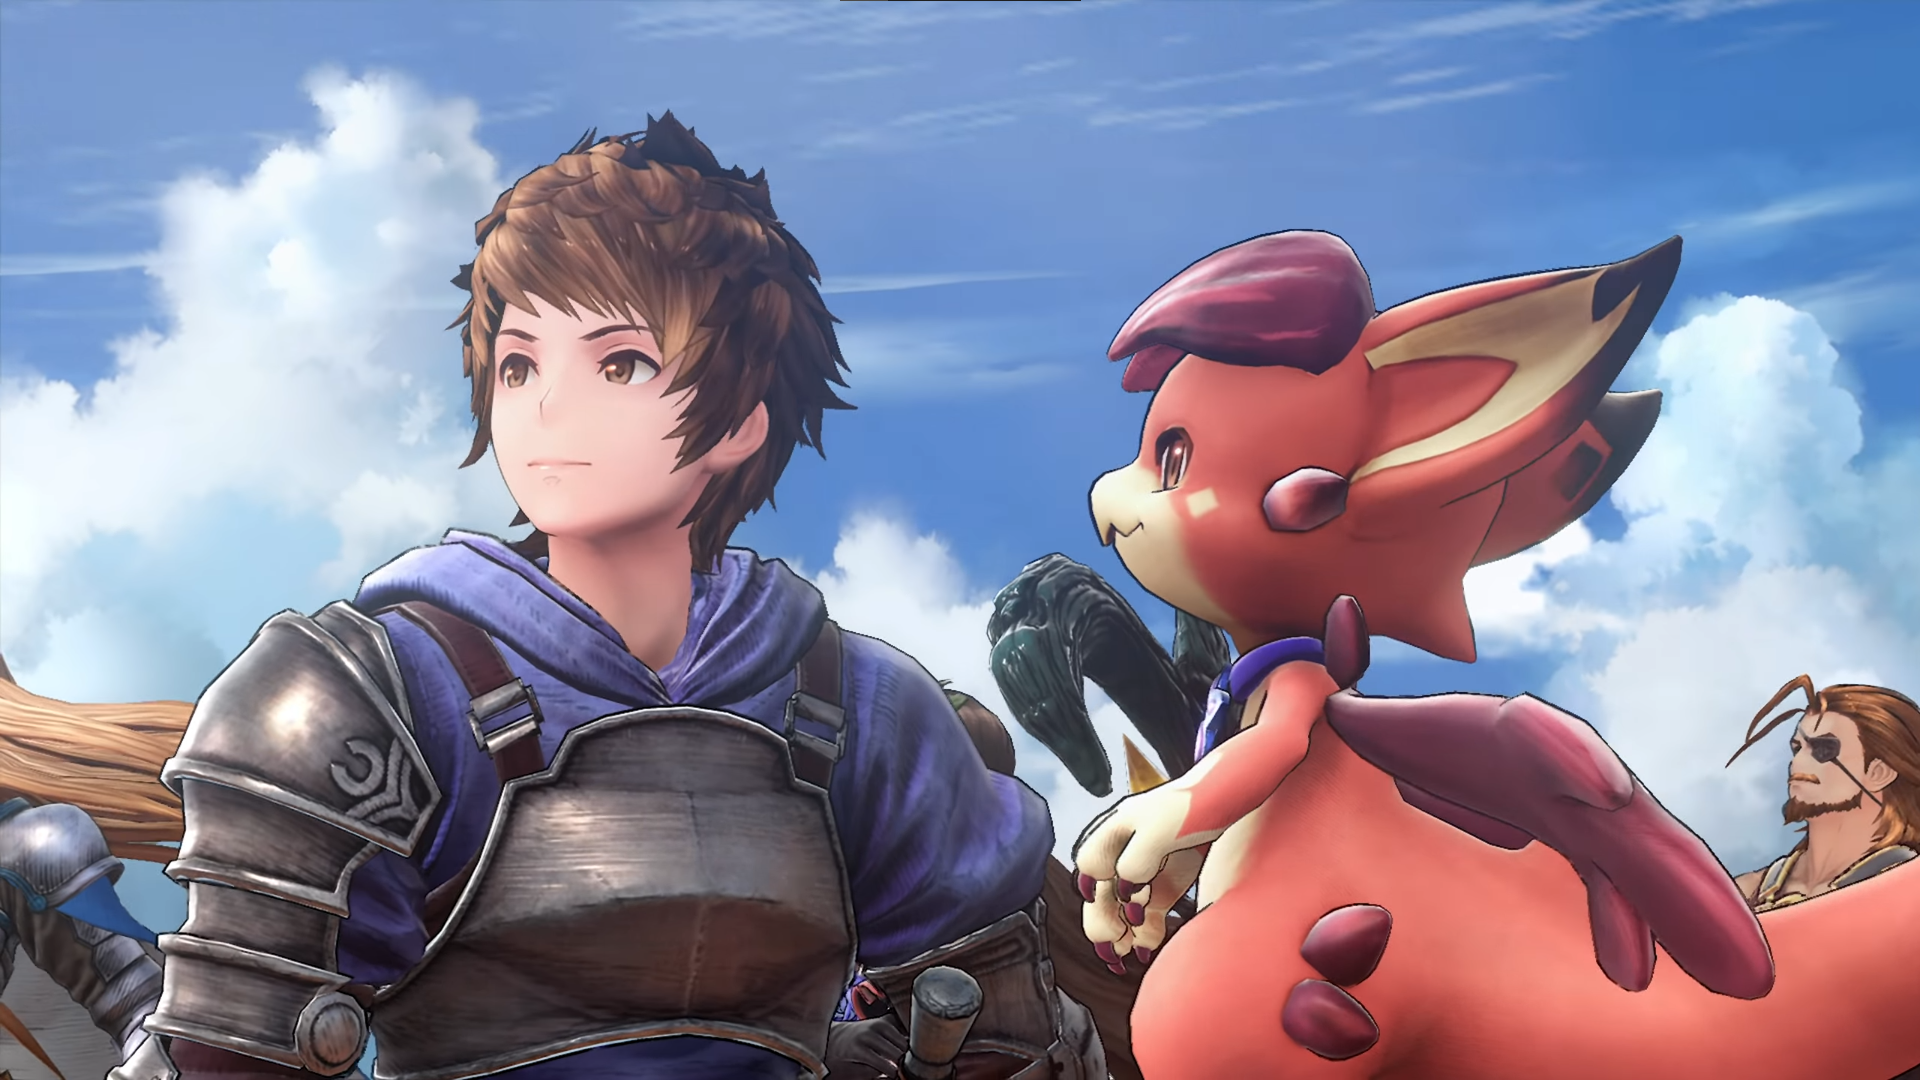 Granblue Fantasy: Relink' Release Date: Story, Gameplay, & More